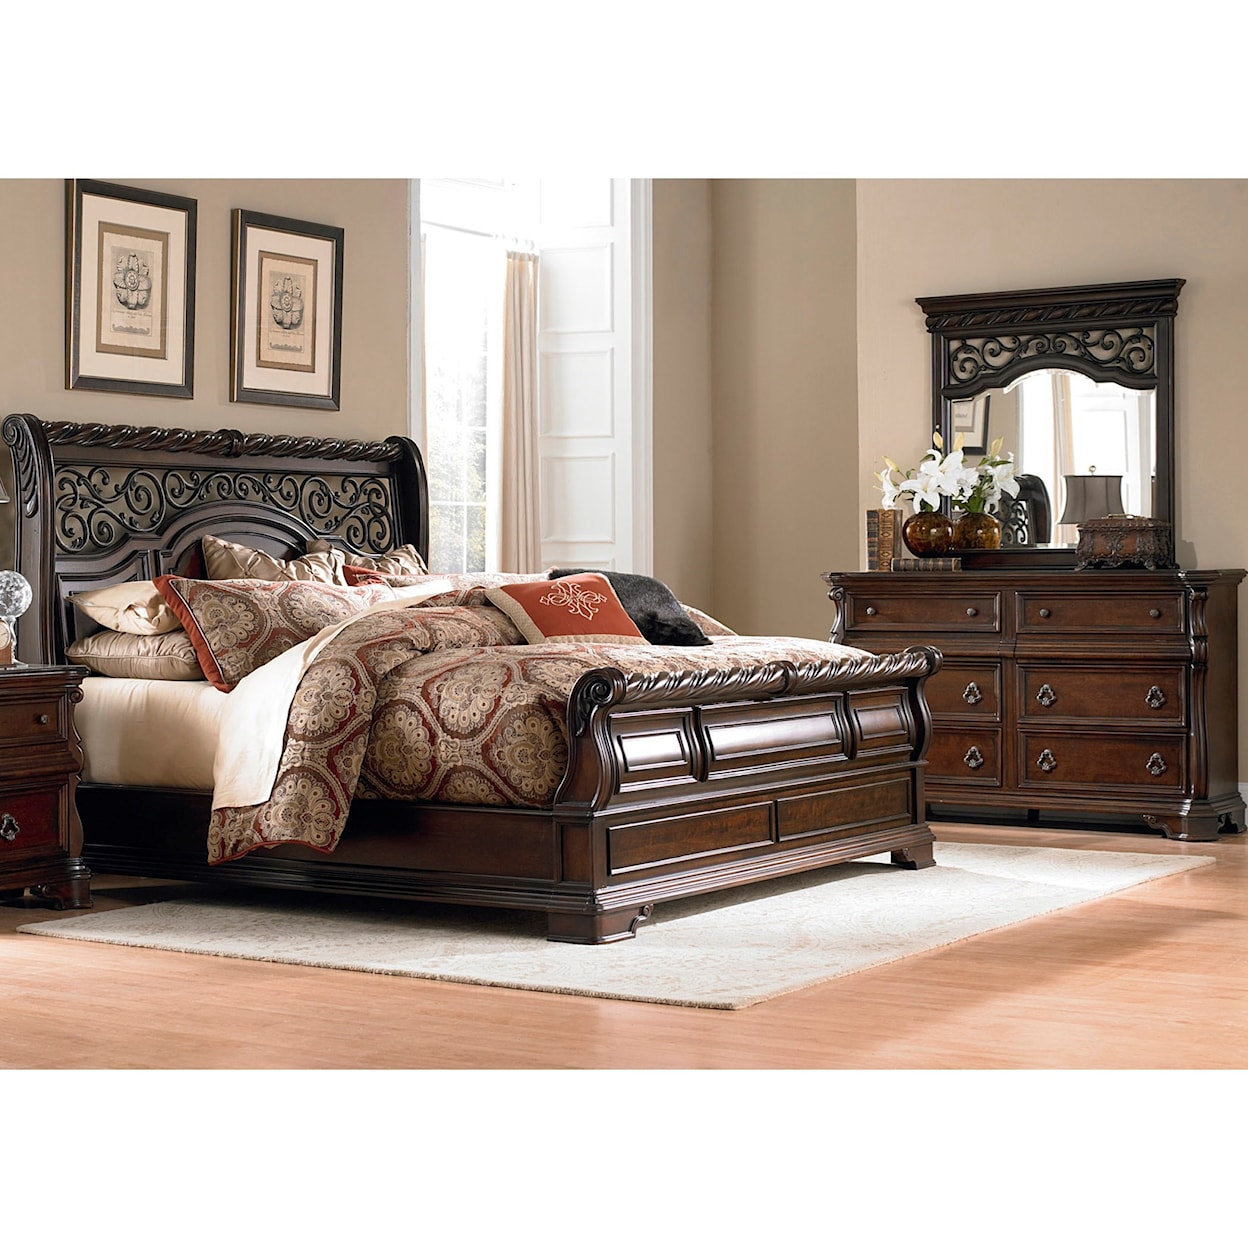 Liberty Furniture Arbor Place Queen Bedroom Group